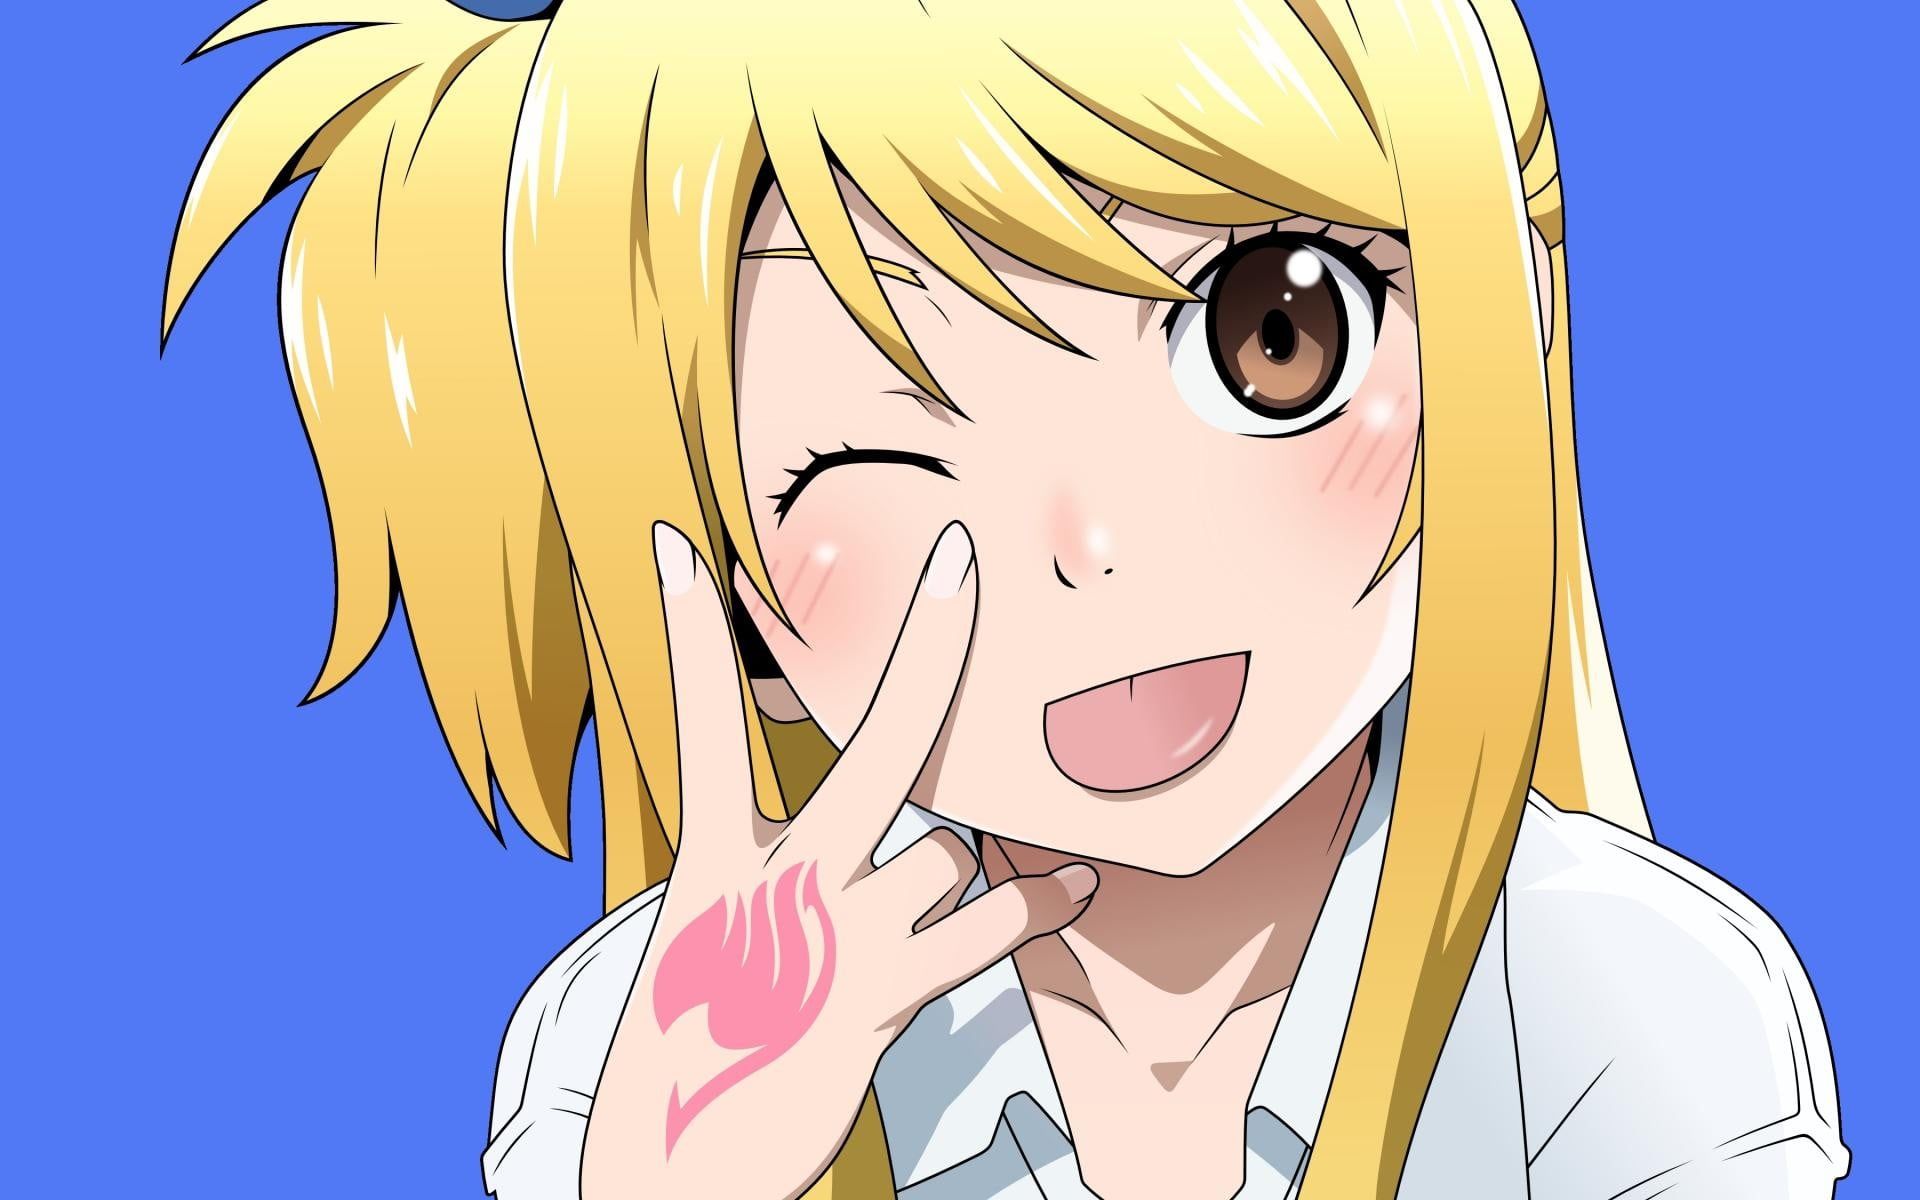 3. Lucy Heartfilia from Fairy Tail - wide 8